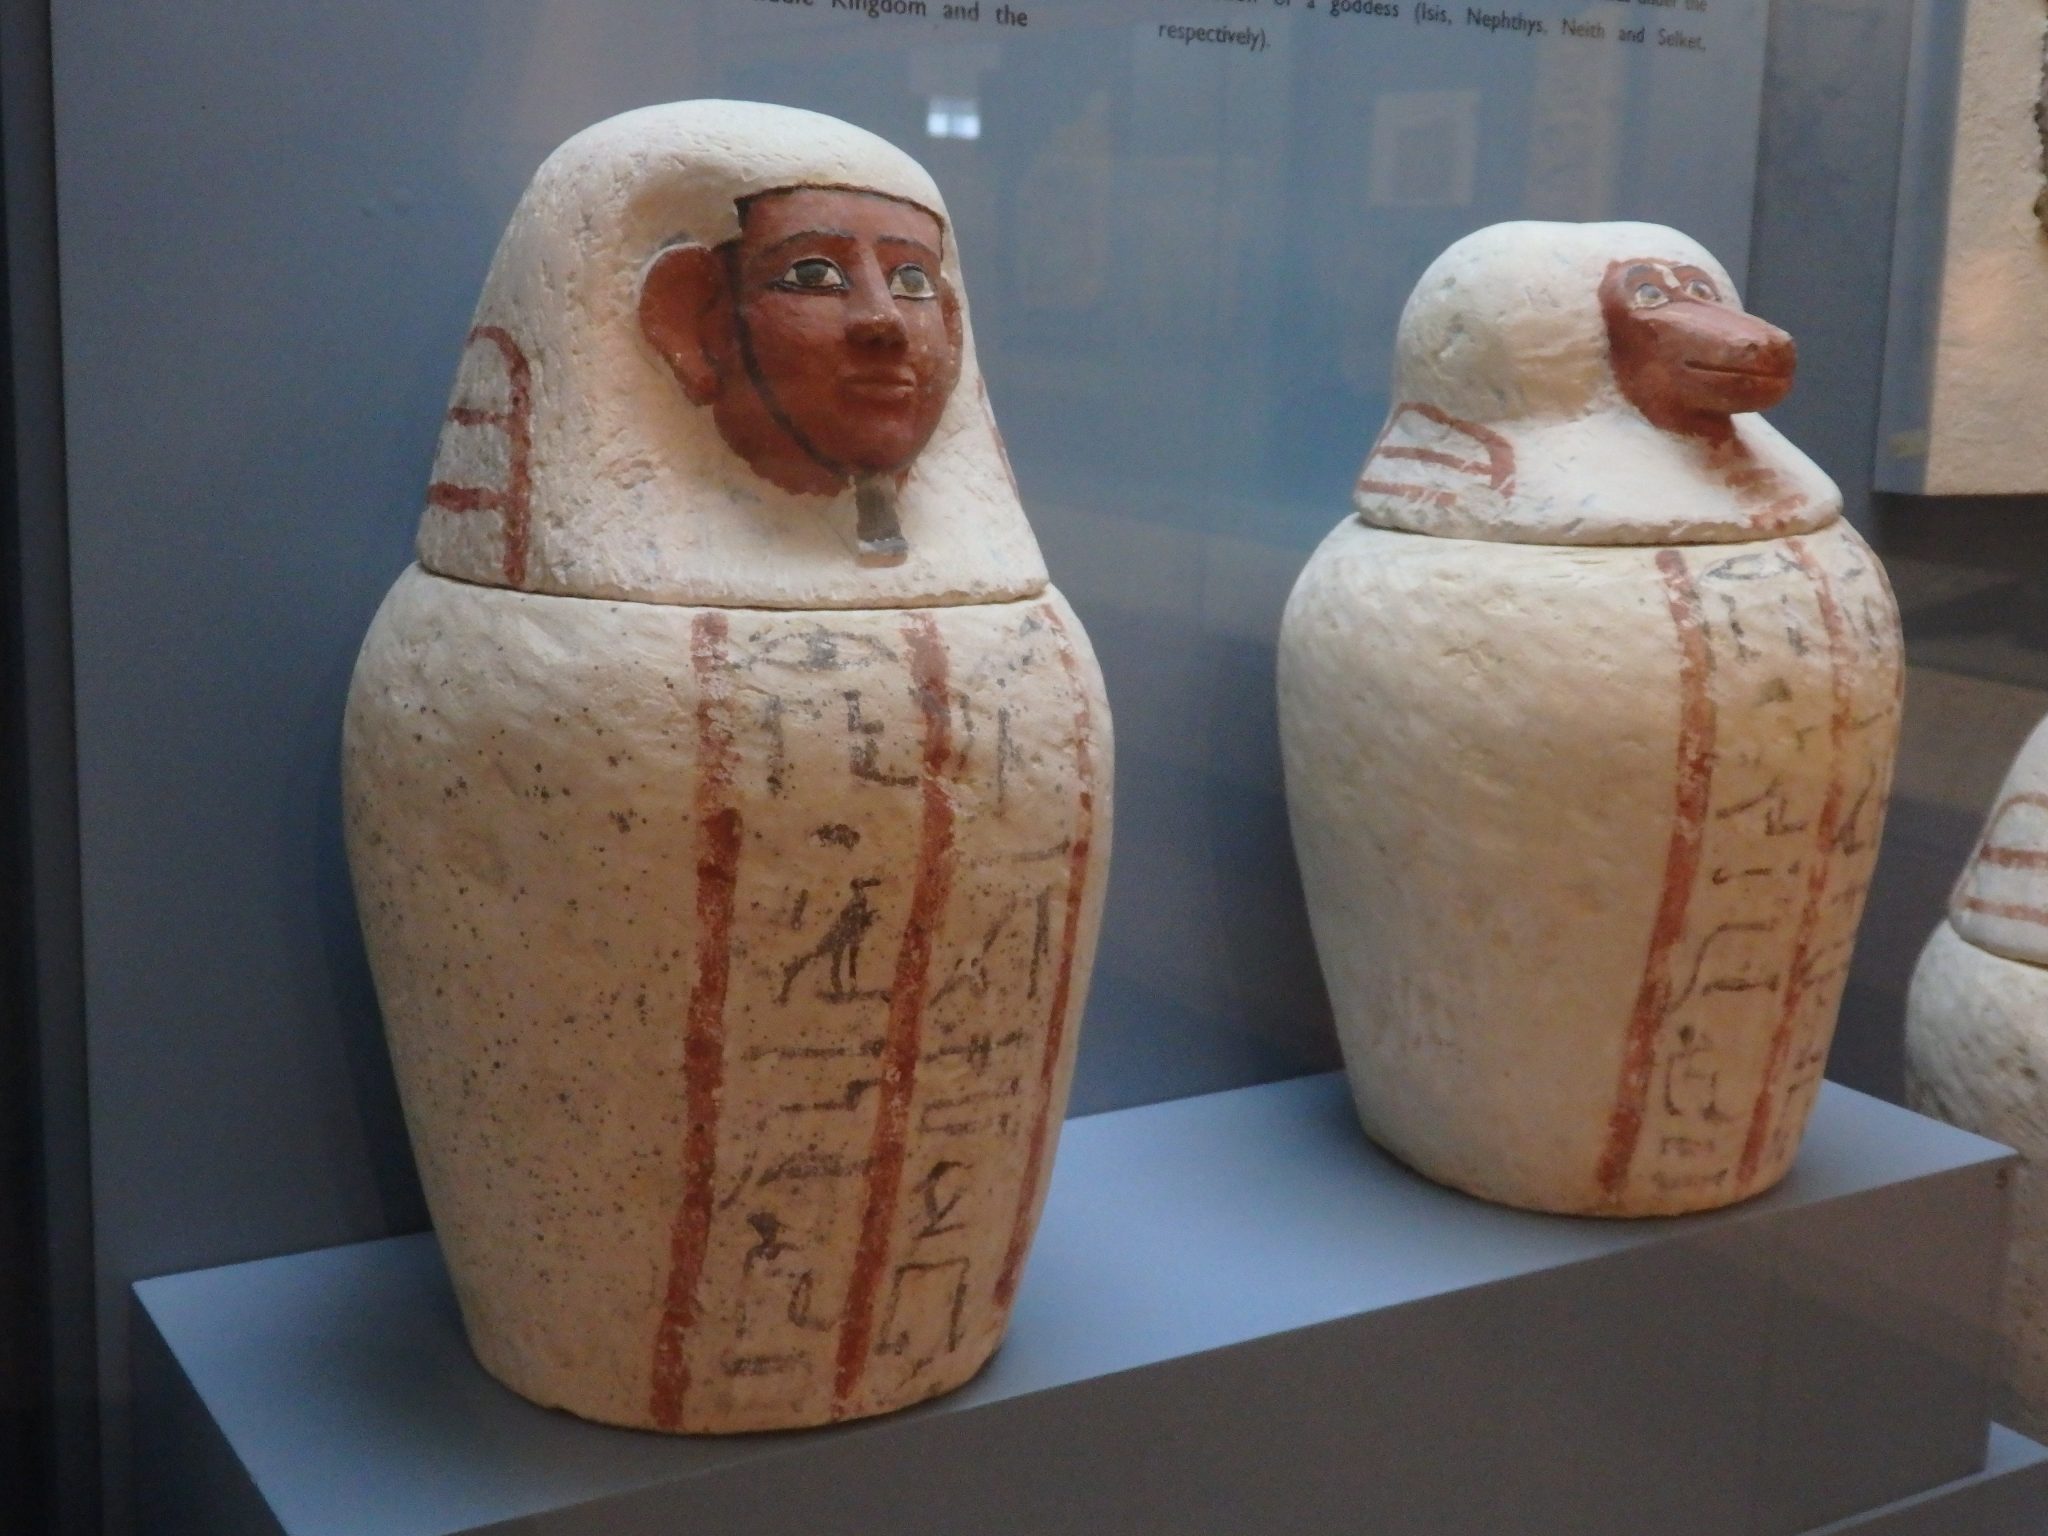 Canopic jars from 19th-20th Egyptian dynasties, 1307-1070 BCE, in the Bible Lands Museum, Jerusalem